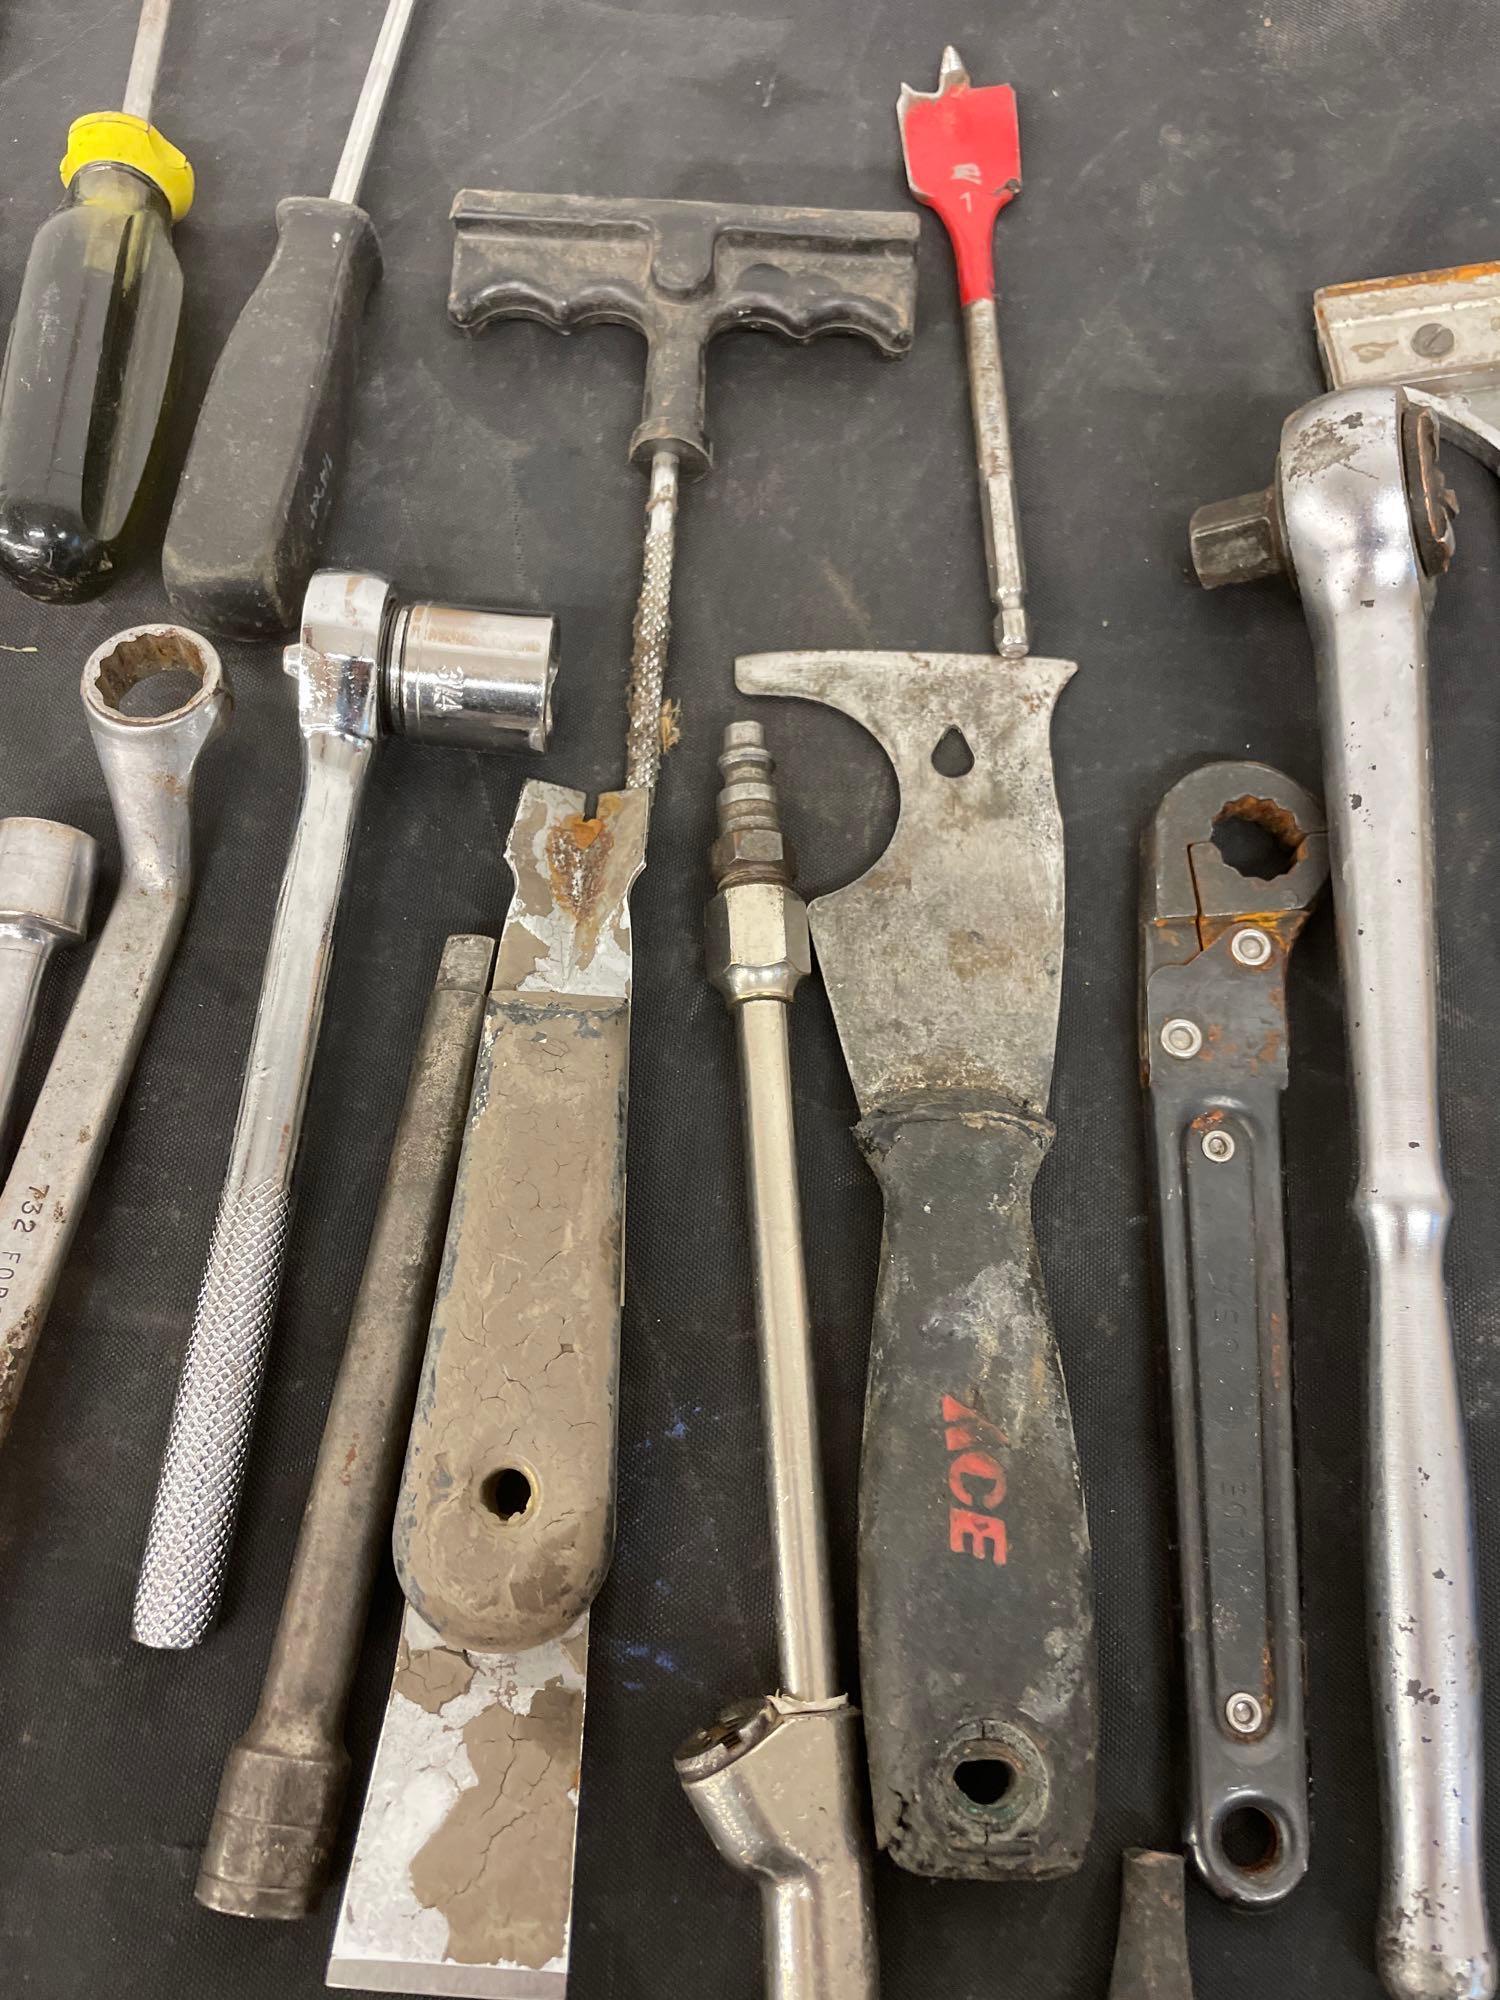 Screwdrivers, 3/4 craftsman wrench, bits and more